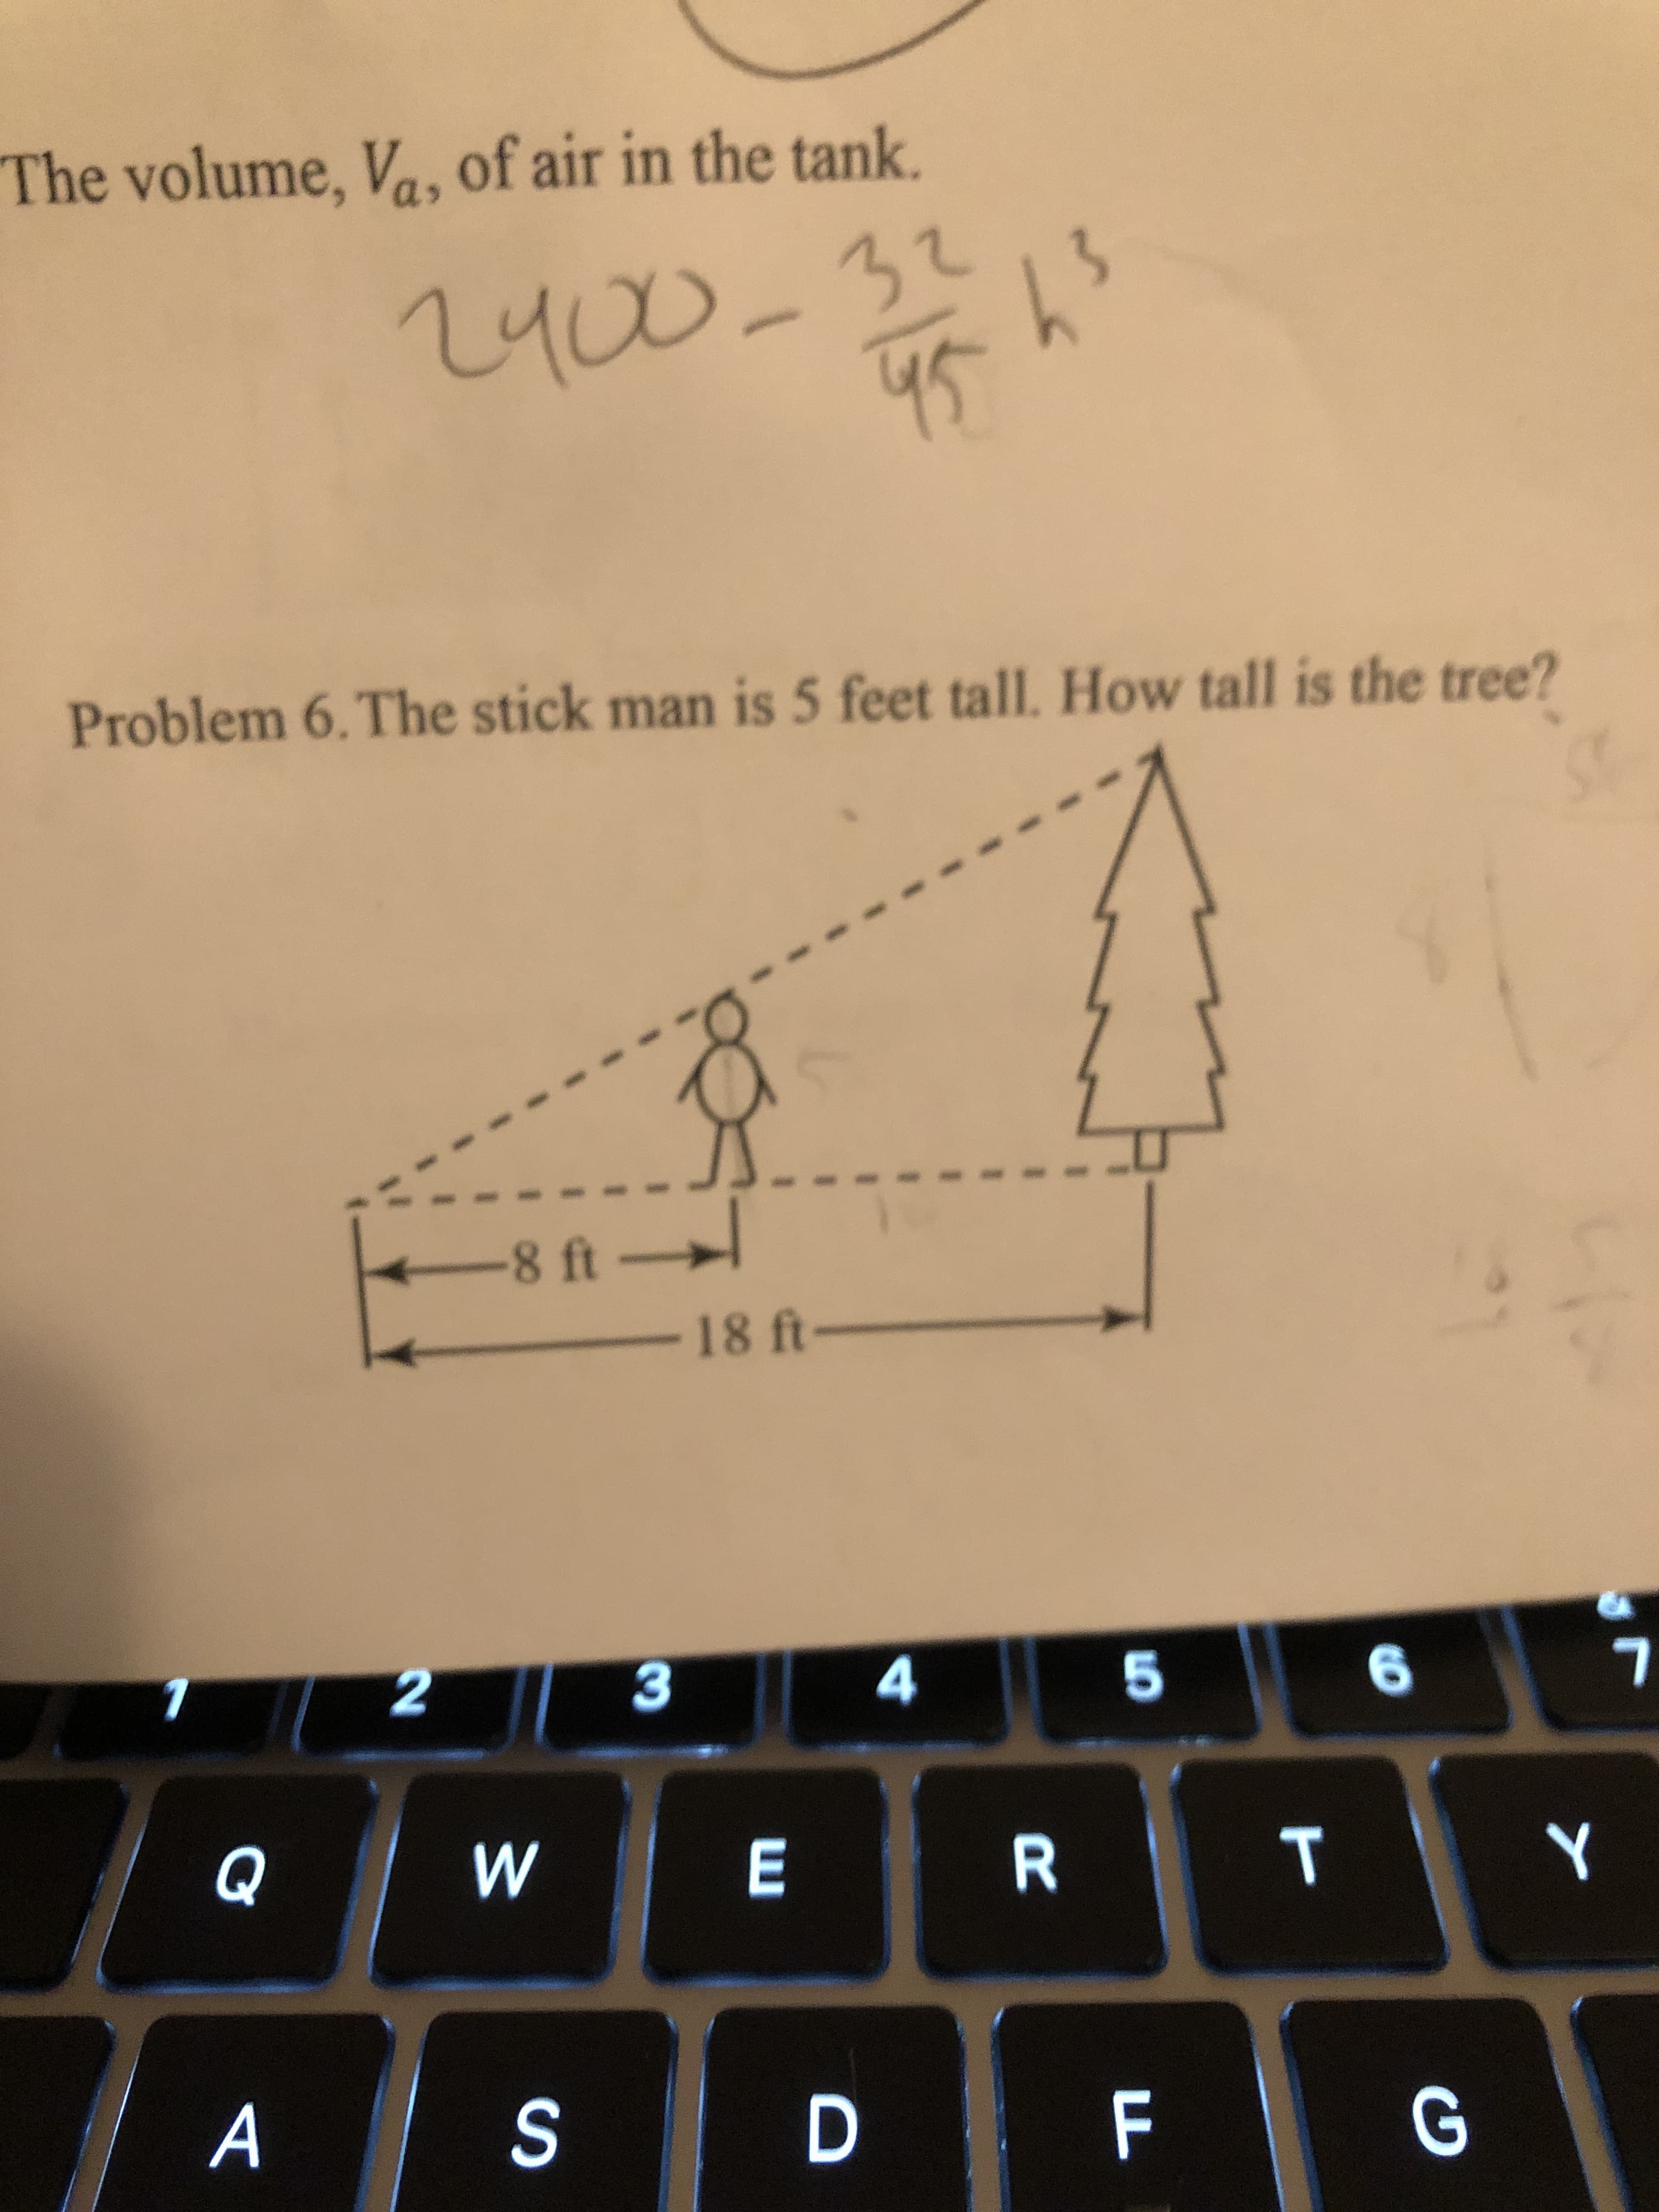 6. The stick man is 5 feet tall. How tall is the tree?
-8 ft
18 ft-
